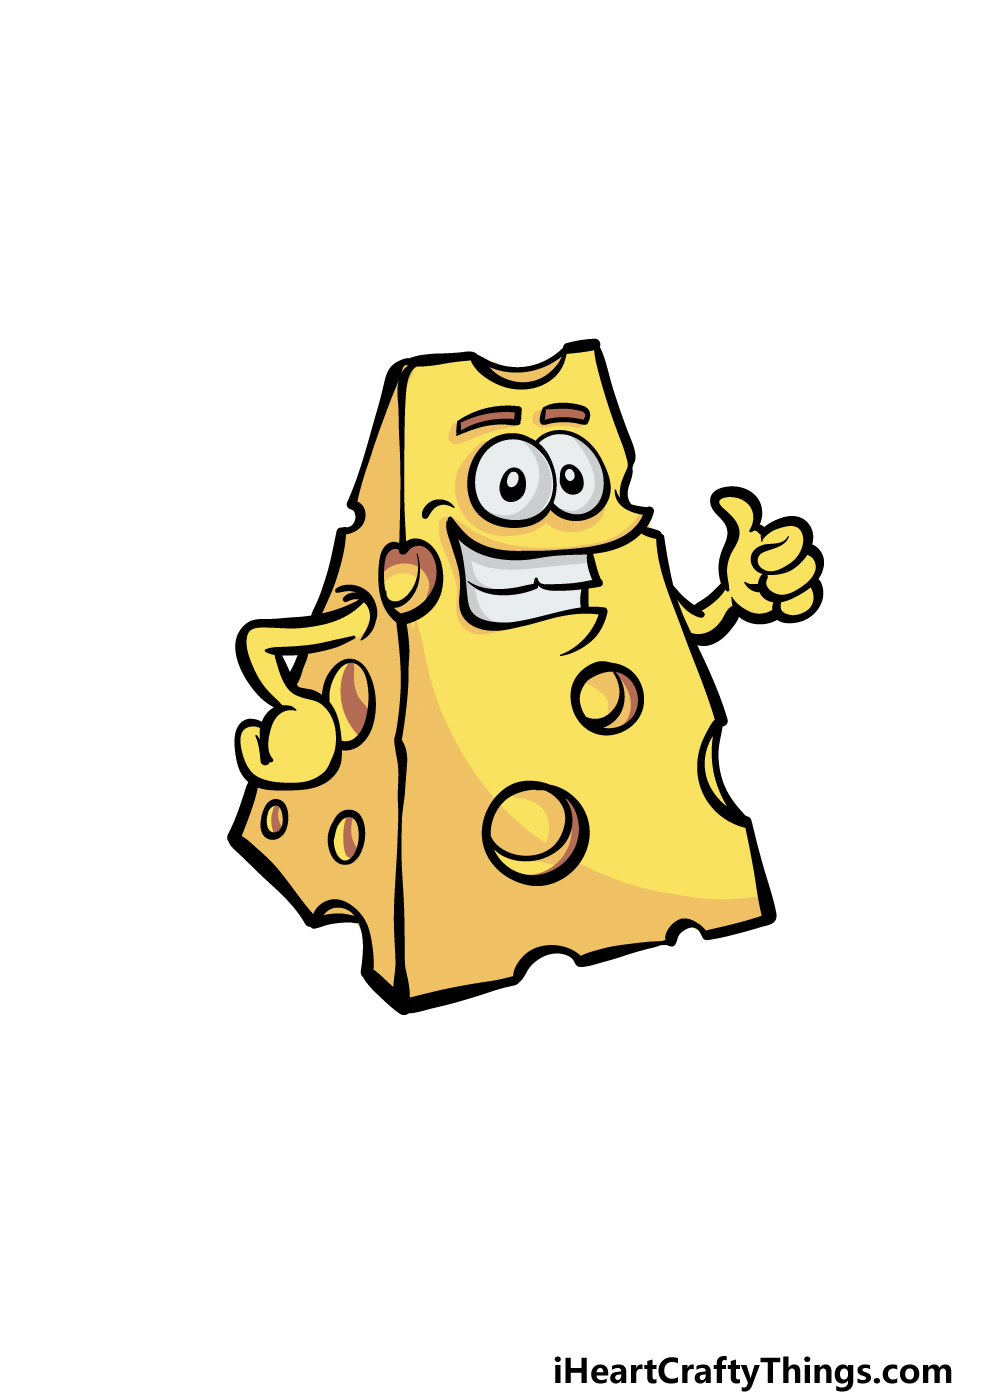 Cartoon Cheese Drawing - How To Draw A Cartoon Cheese Step By Step